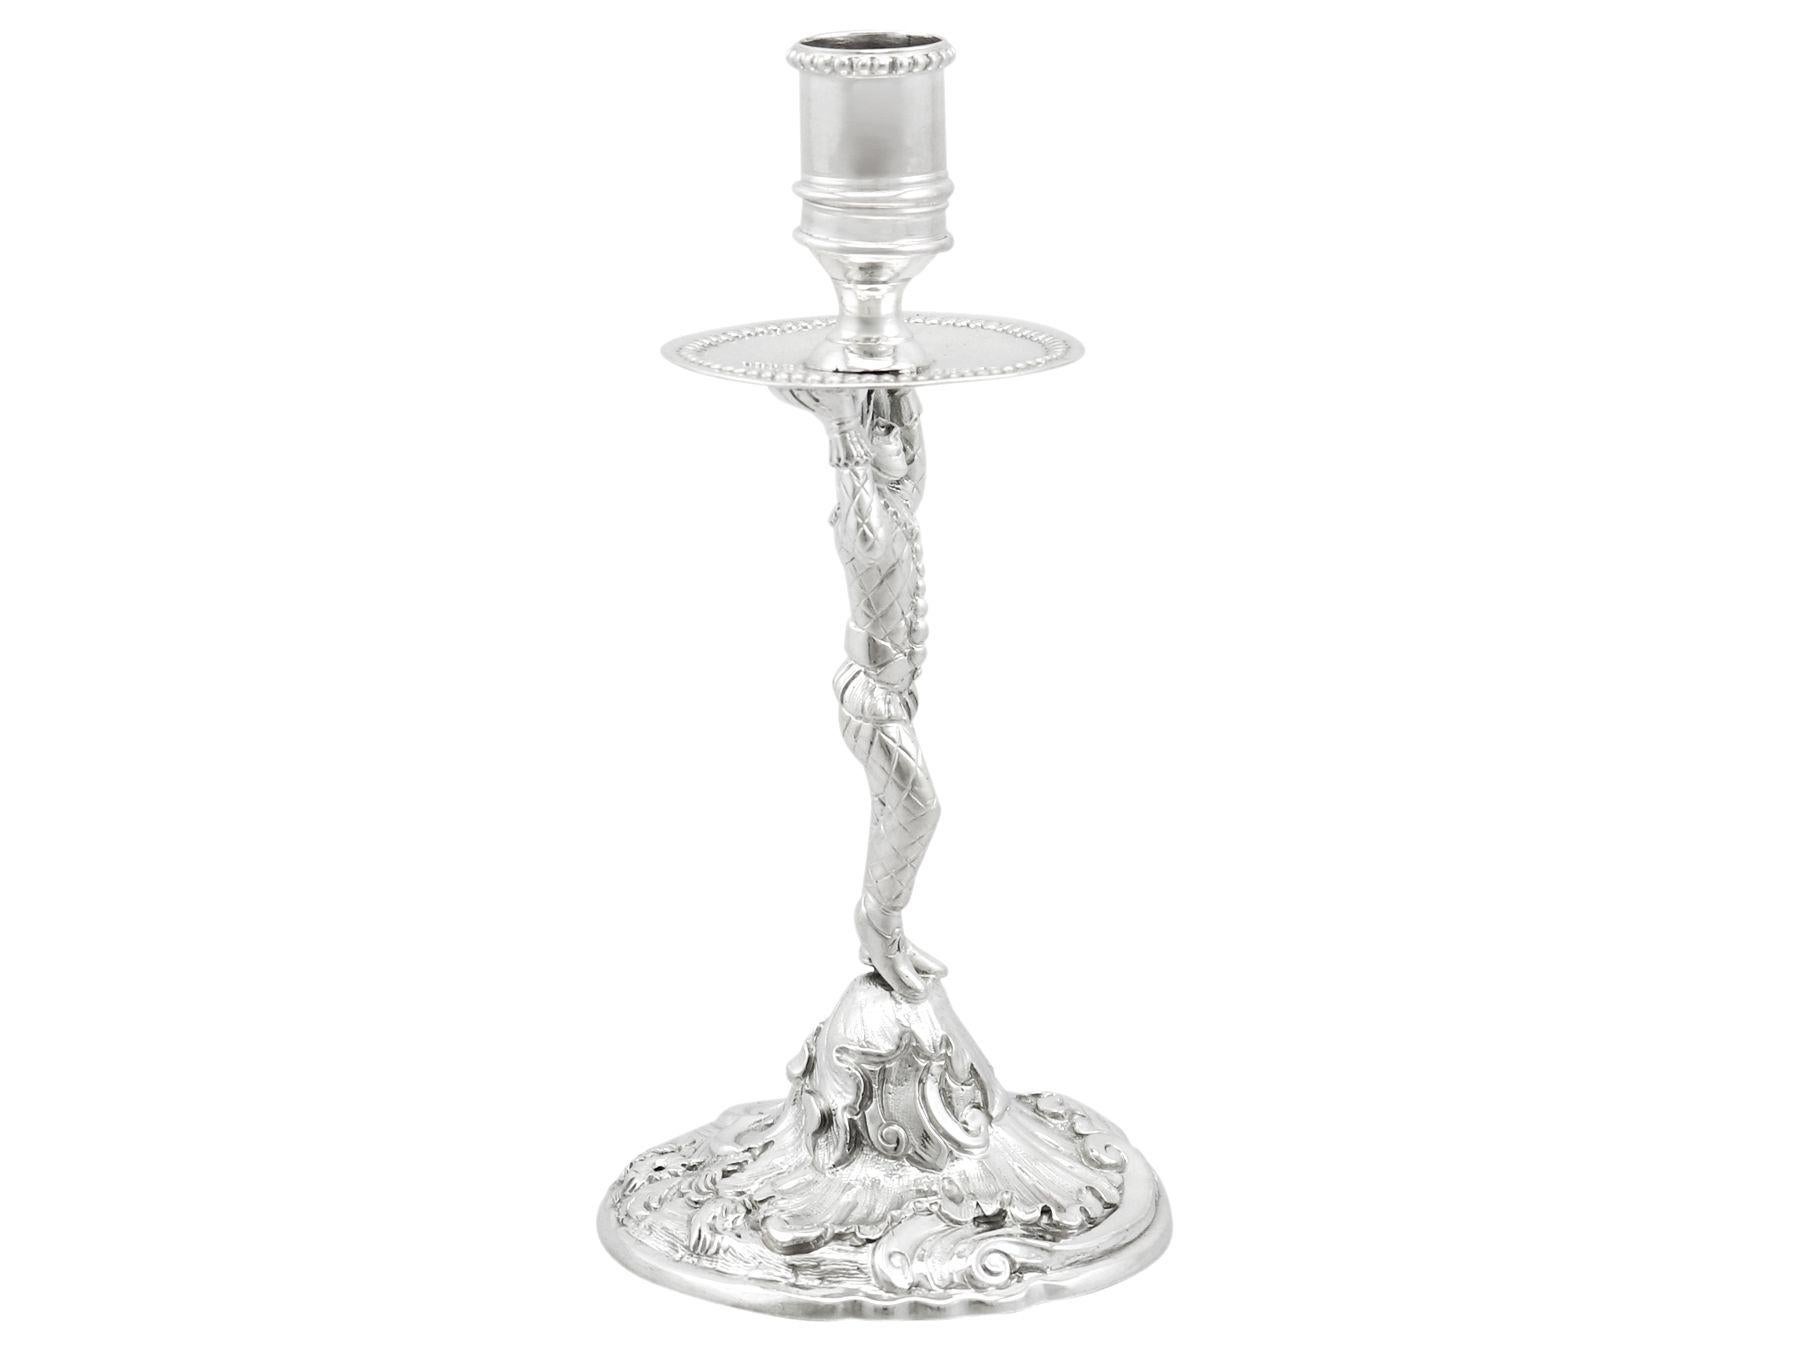 An exceptional, fine and impressive antique George III English cast sterling silver taperstick made by William Cafe; an addition of AC Silver's ornamental silverware collection.

This exceptional antique George III cast sterling silver taperstick